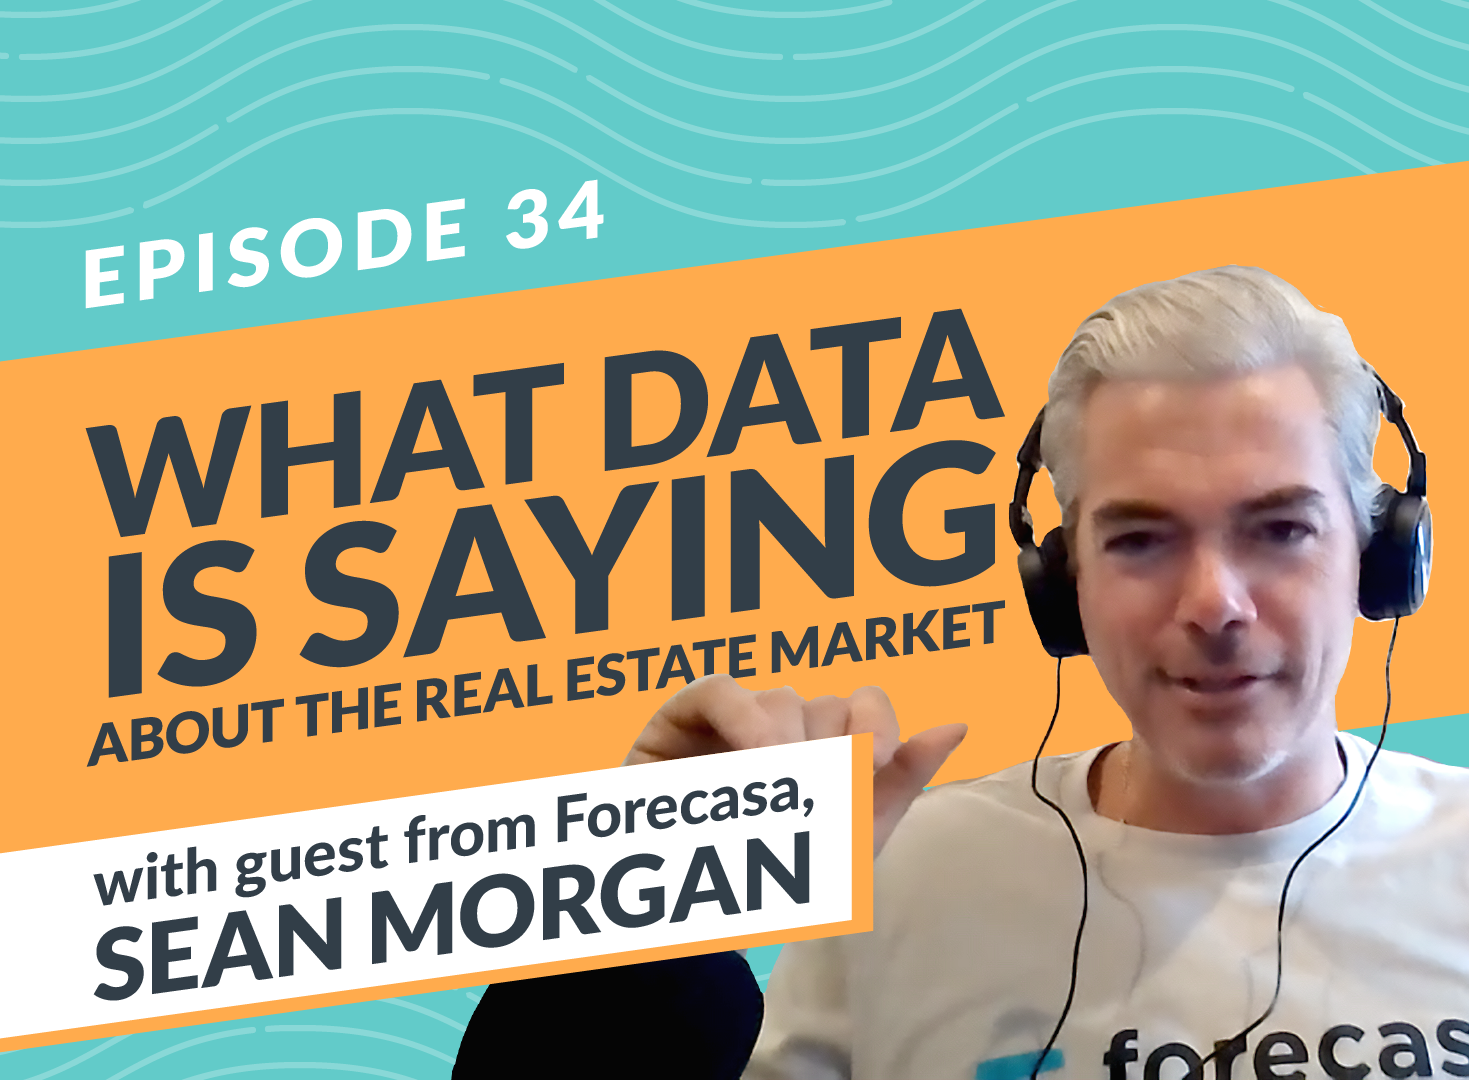 CEO of Forecasa Sean Morgan stops by Real Estate Investing Unscripted to talk about data-driven real estate market predictions and his thoughts on the private lending industry today.